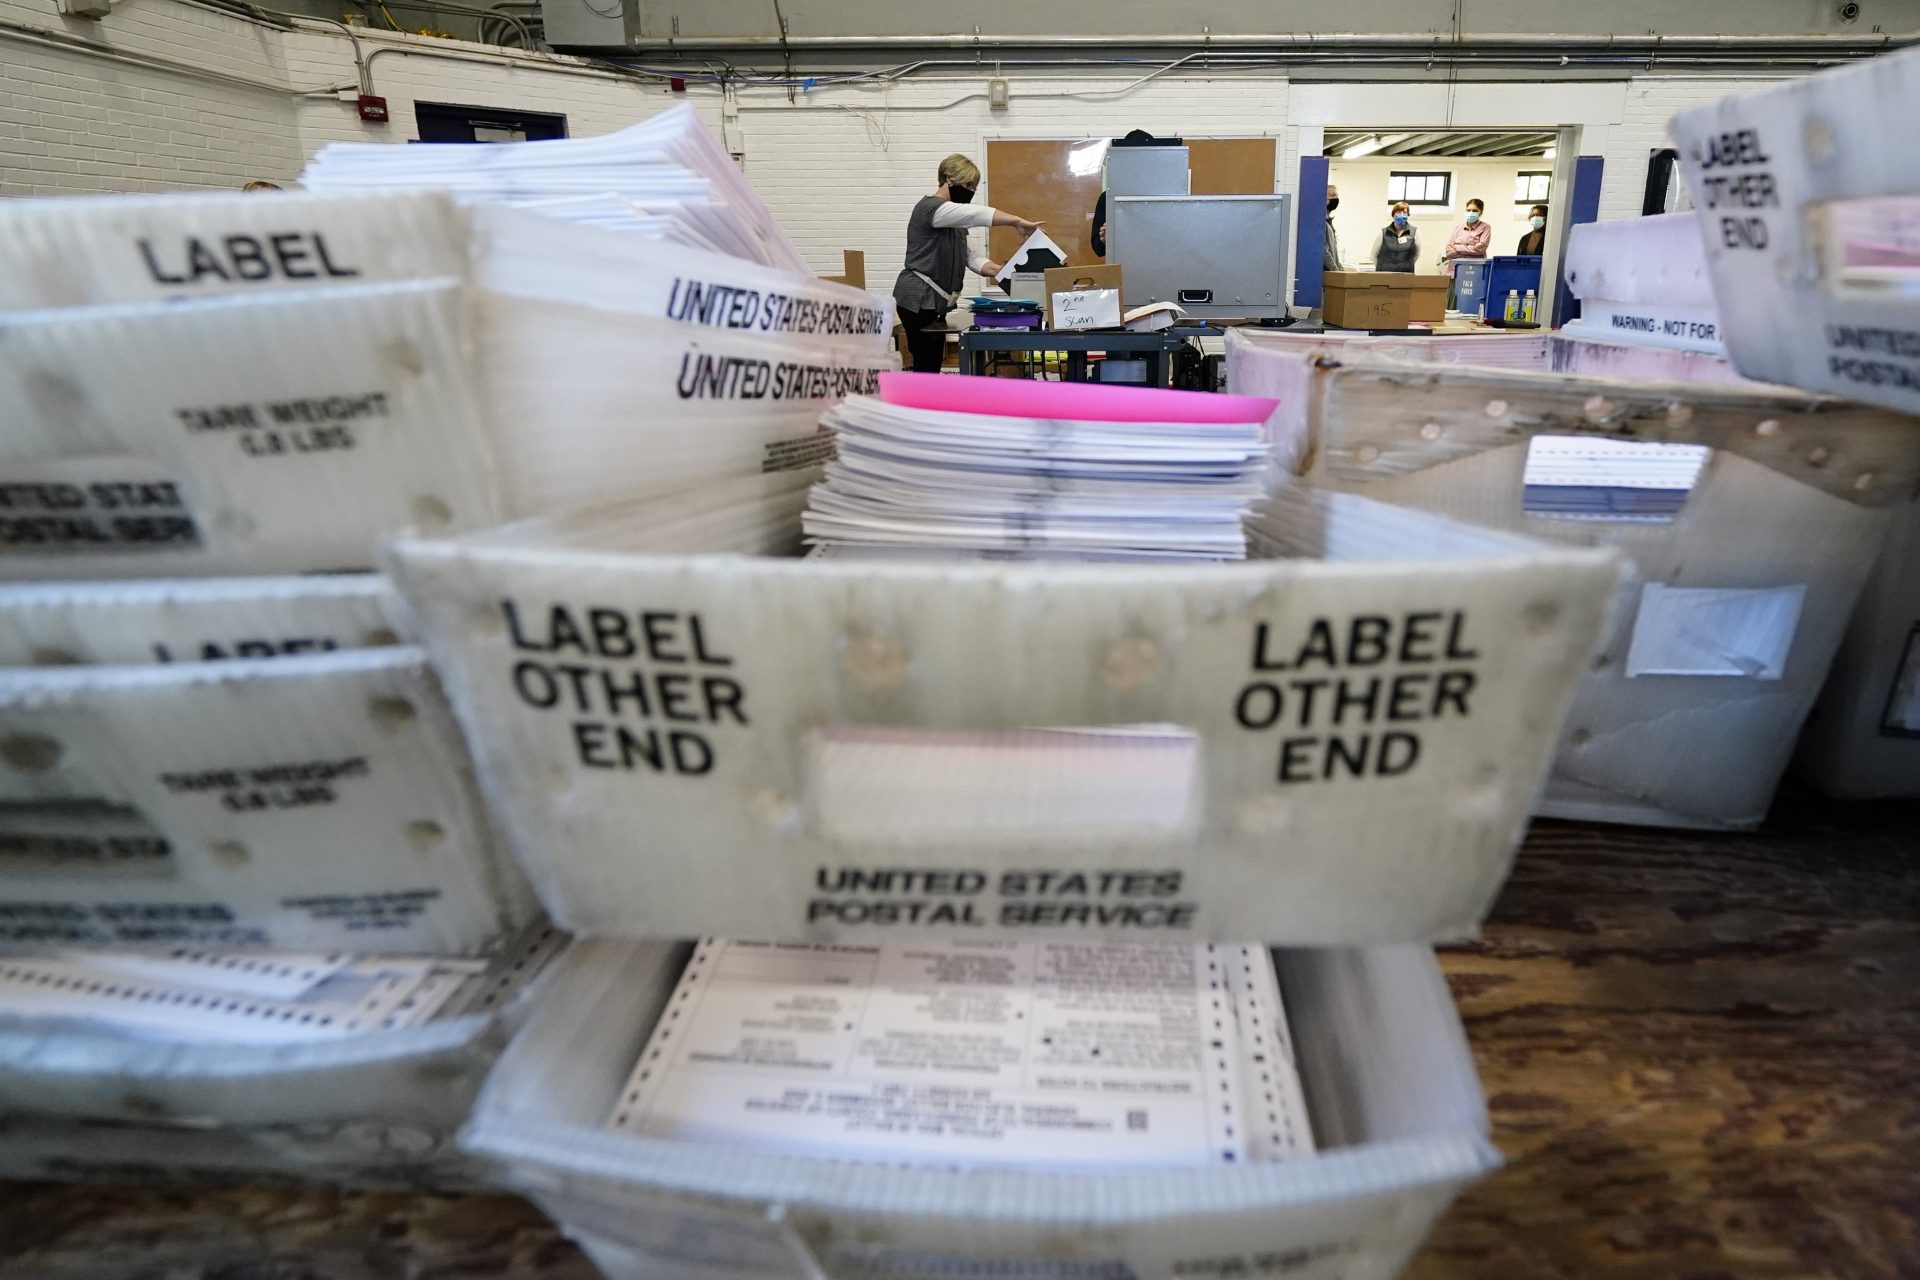 Chester County election workers scan mail-in and absentee ballots for the 2020 general election in the United States at West Chester University, Wednesday, Nov. 4, 2020, in West Chester.